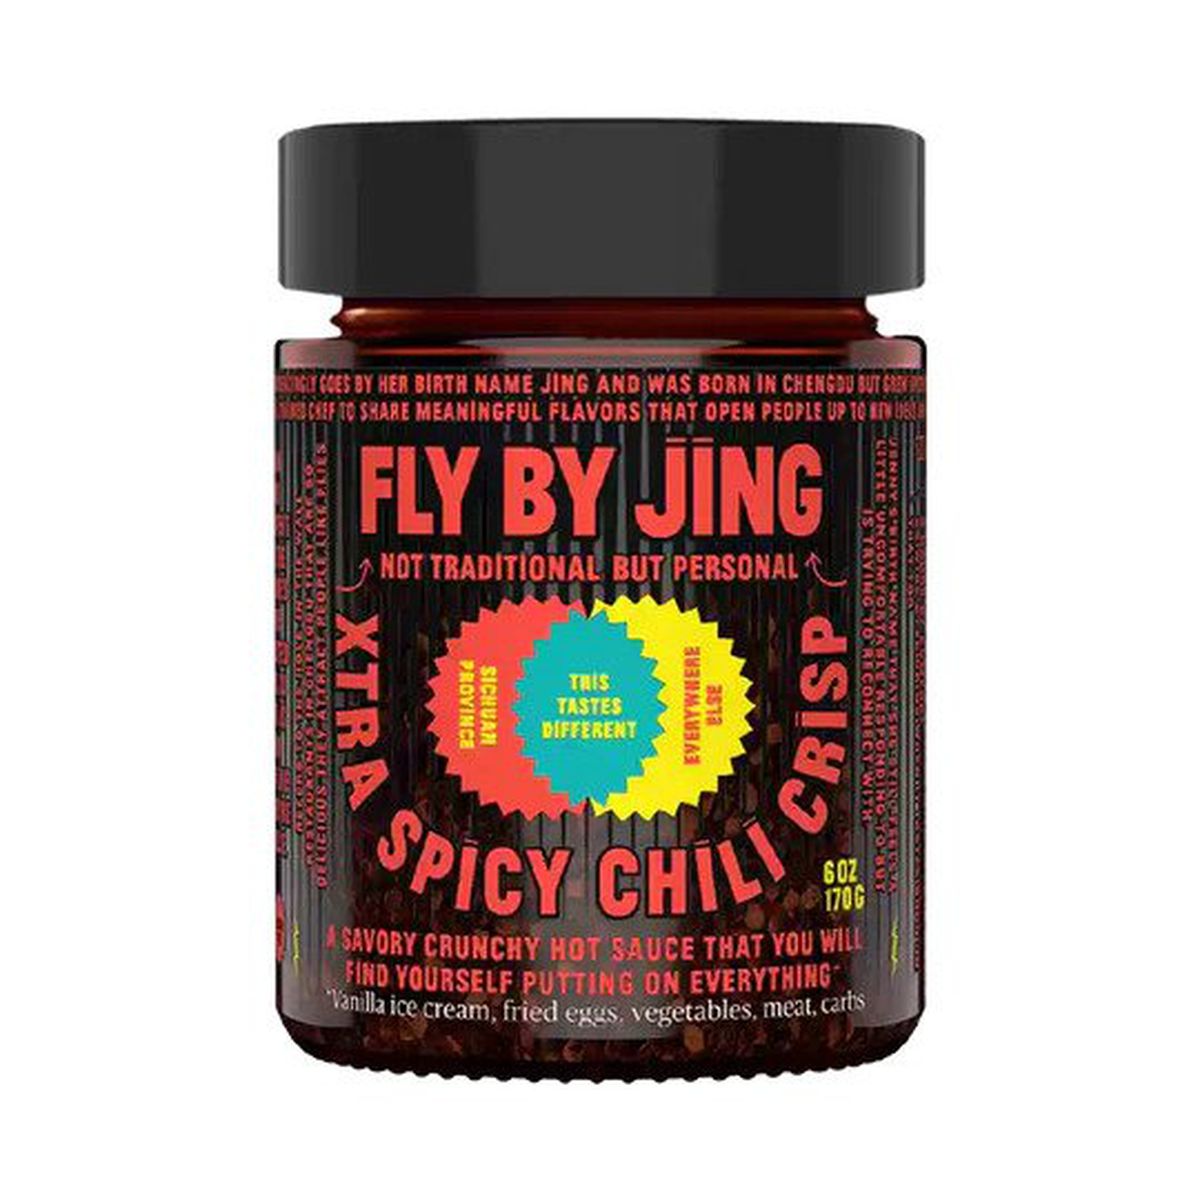 A jar of Fly by Jing Xtra Spicy Chili Crisp